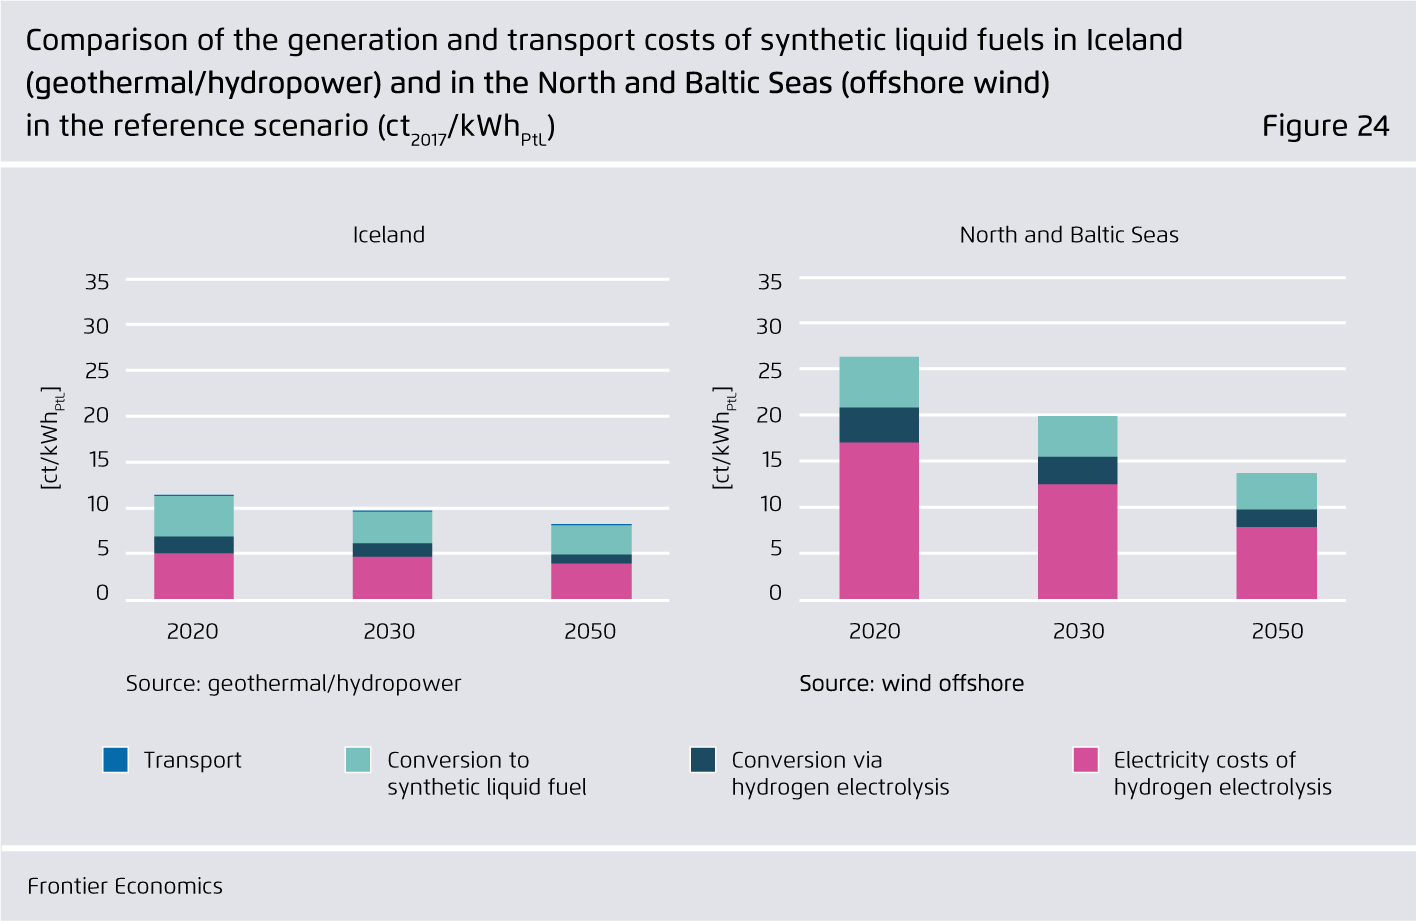 Preview for Comparison of the generation and transport costs of synthetic liquid fuels in Iceland (geothermal/hydropower) and in the North and Baltic Seas (offshore wind) in the reference scenario (ct2017/kWhPtL)